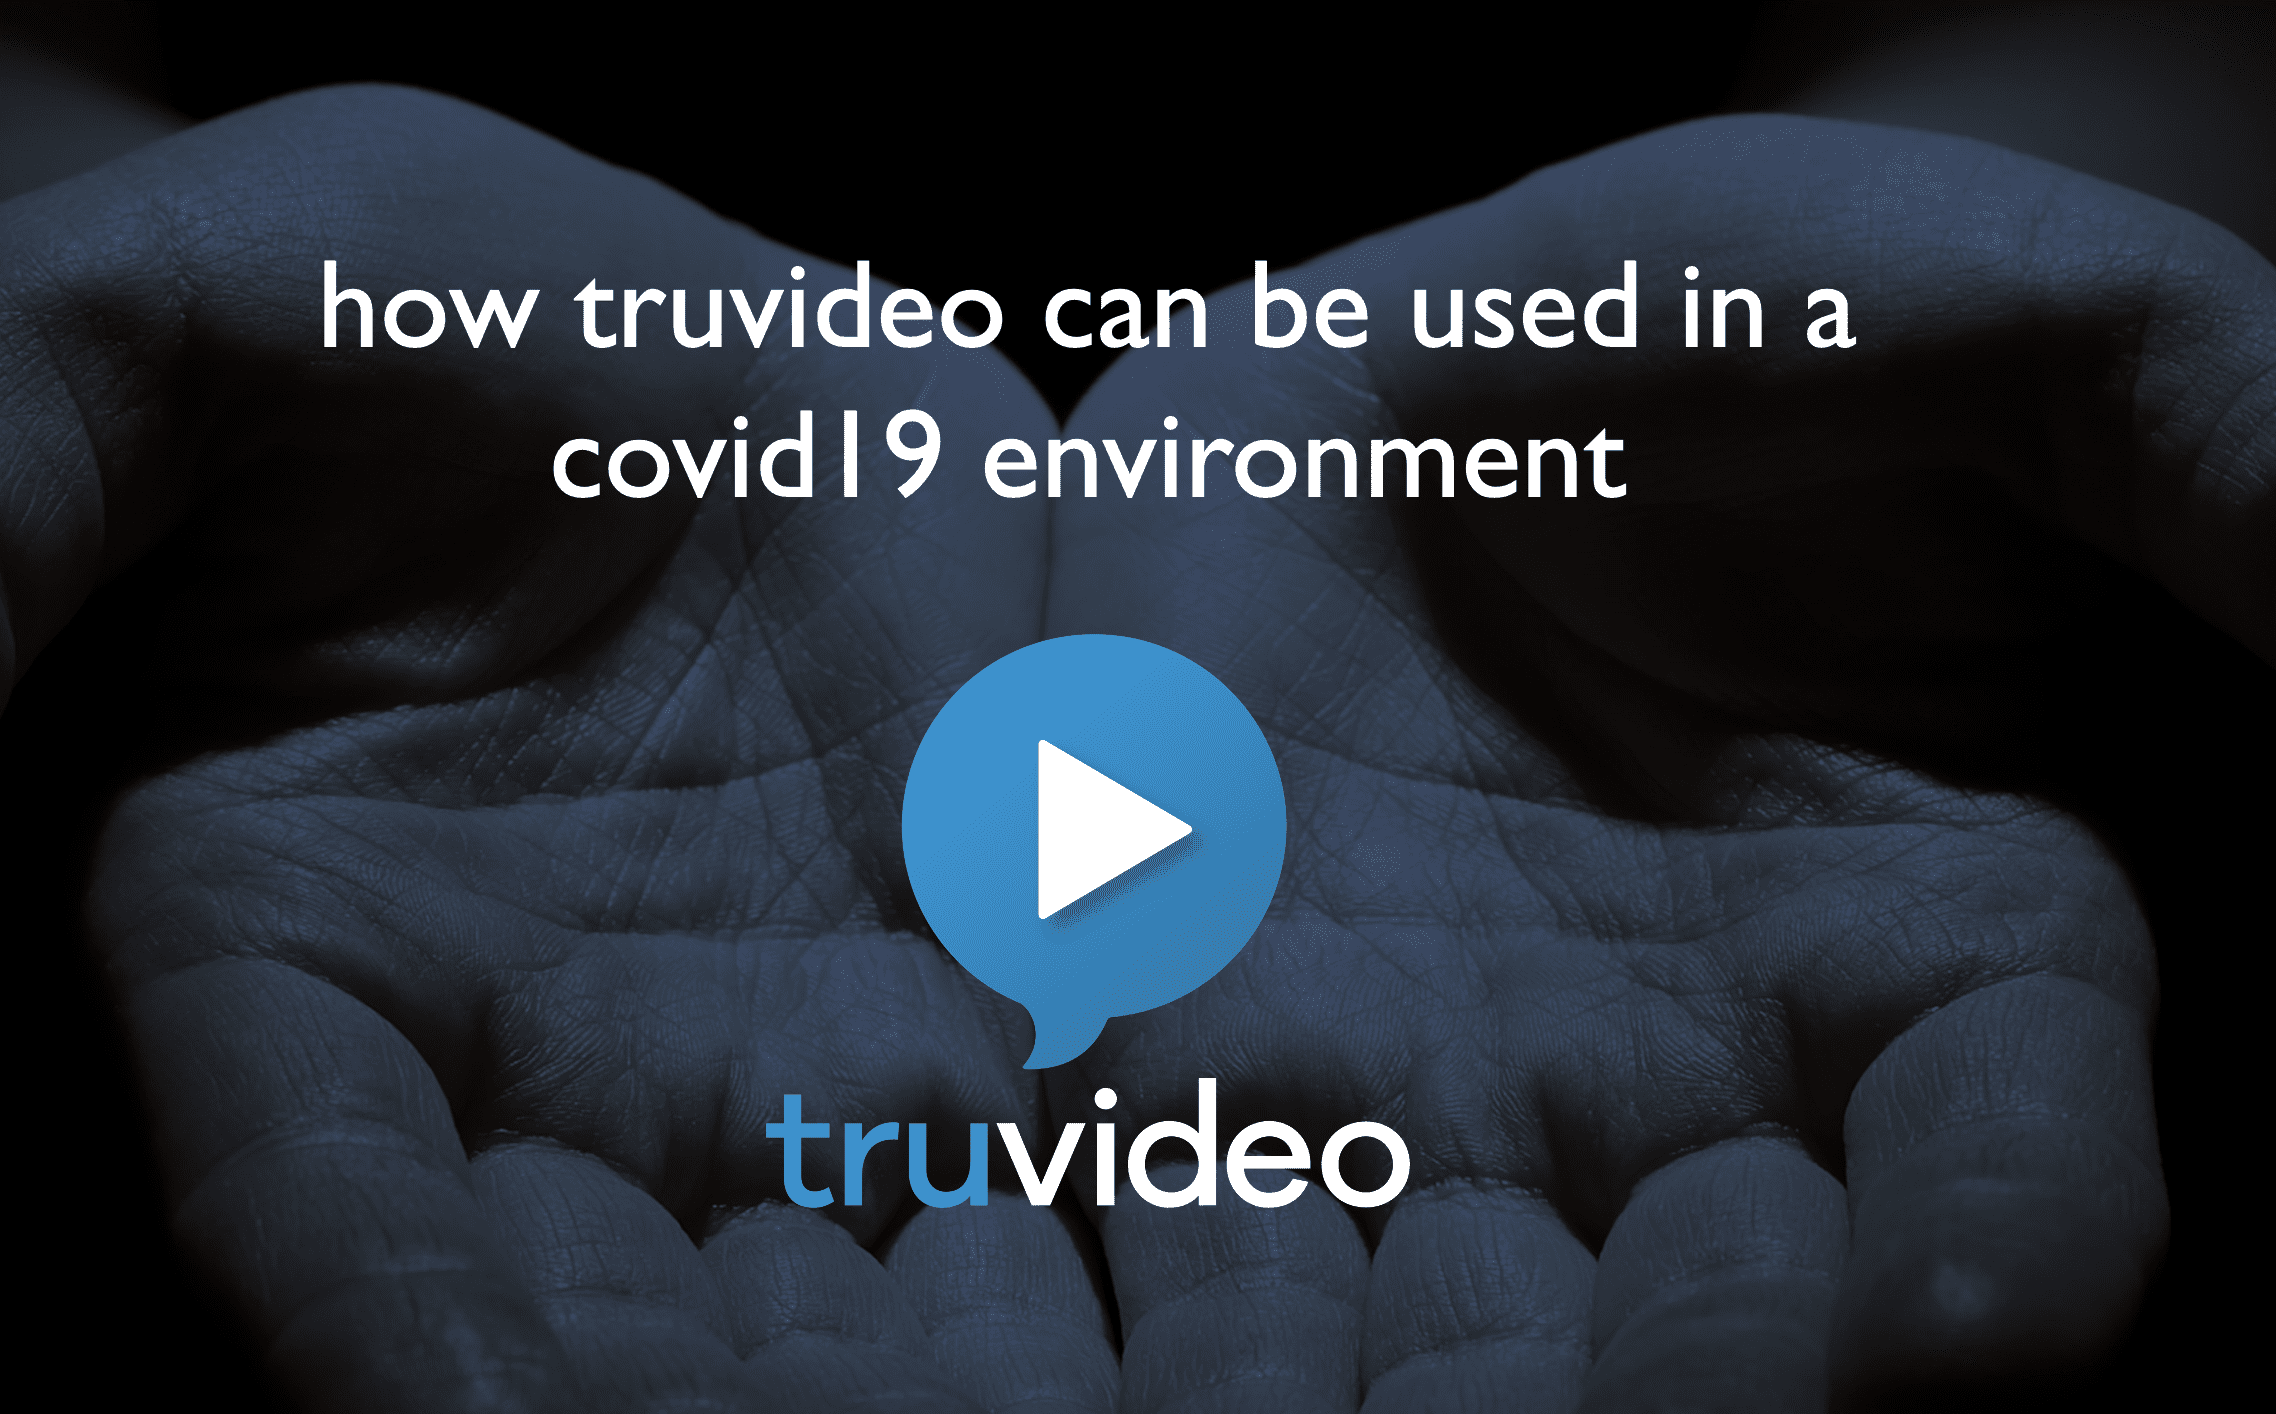 video on how TruVideo can be used in a covid19 environment.